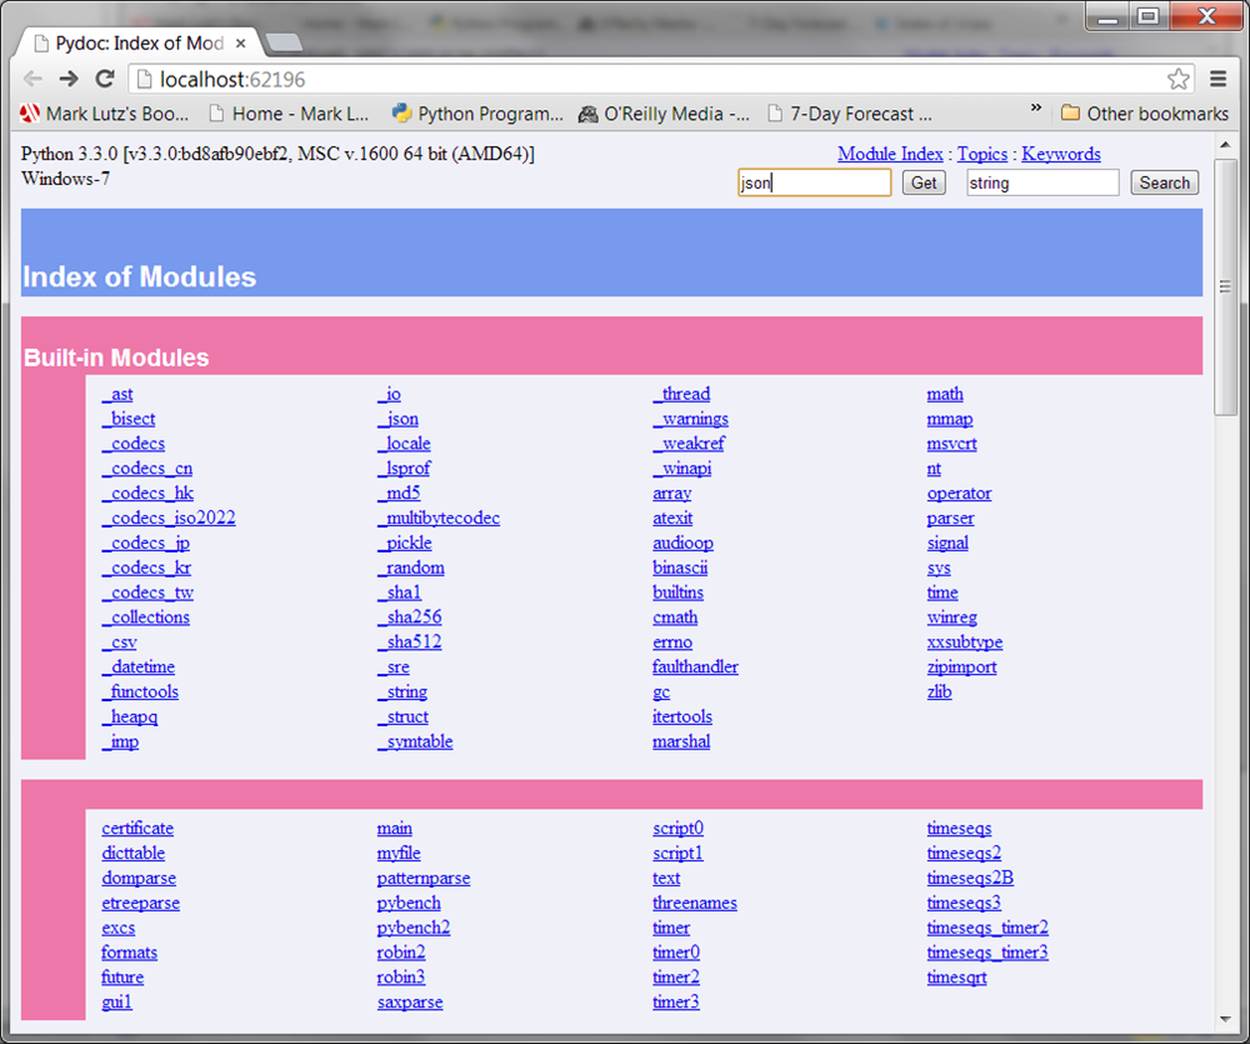 The top-level index start page of the all-browser PyDoc HTML interface in Python 3.2 and later, which as of 3.3 replaces the former GUI client in earlier Pythons.